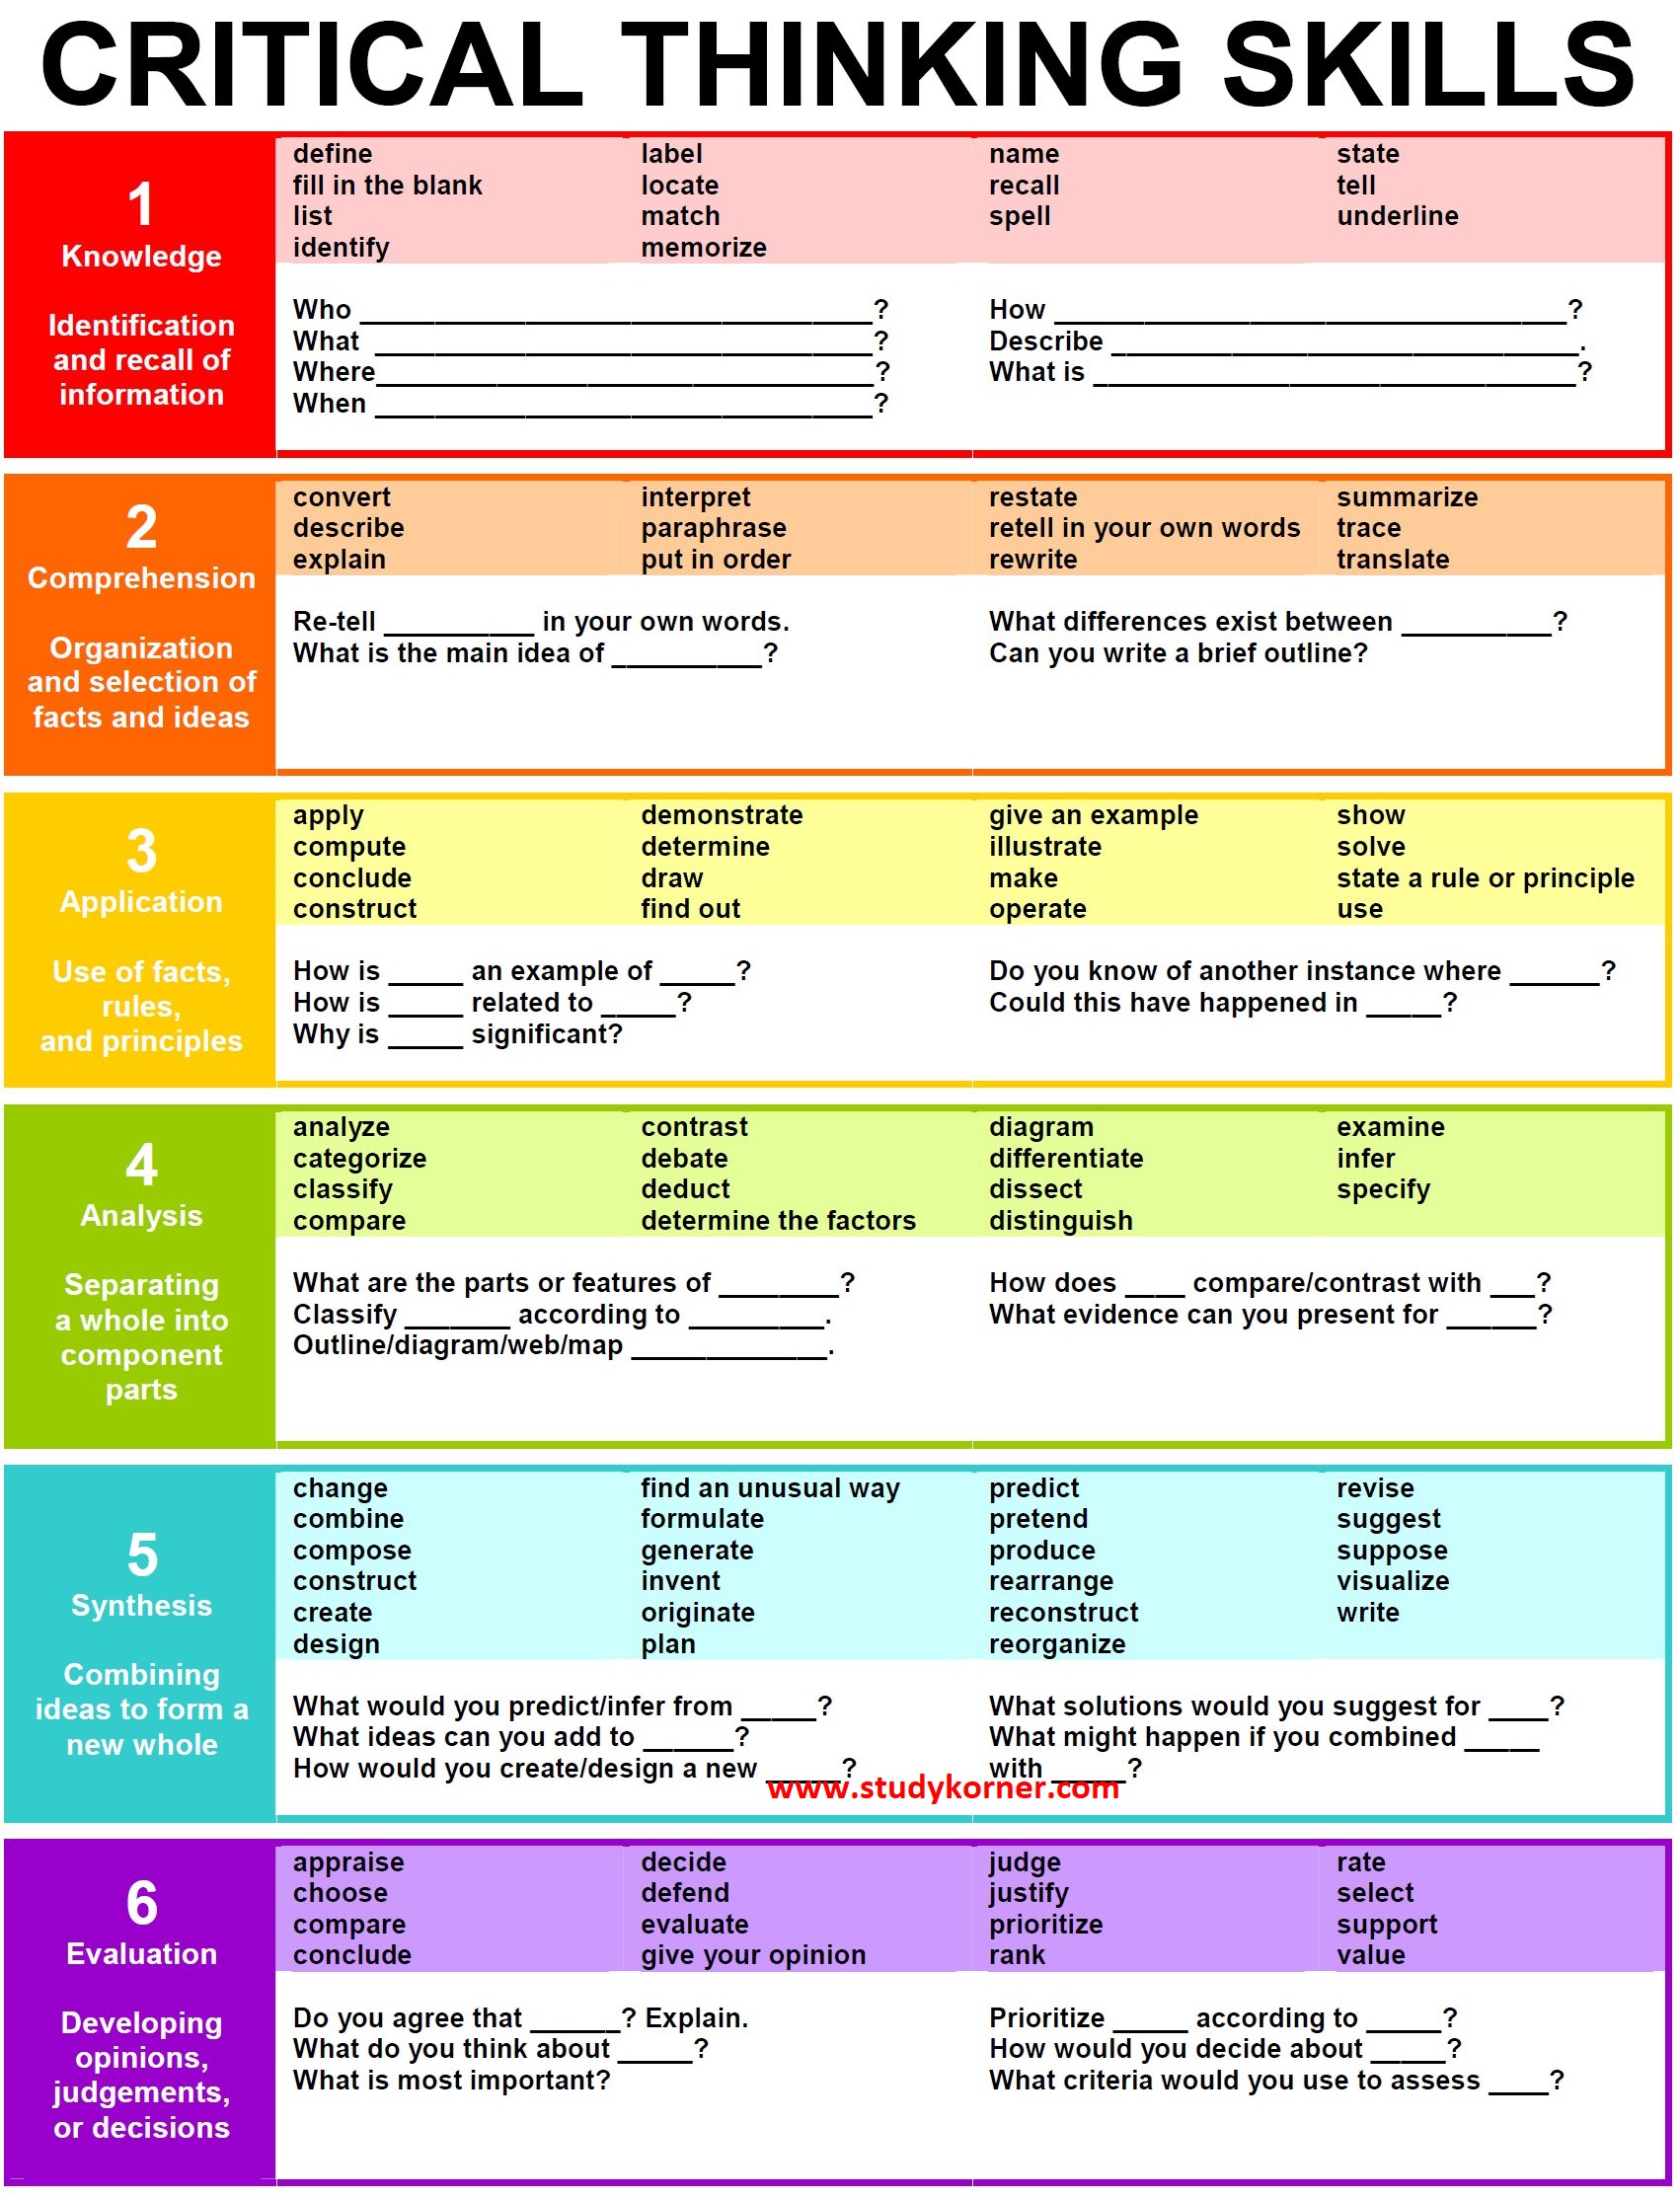 25 Question Stems Framed Around Bloom's Taxonomy